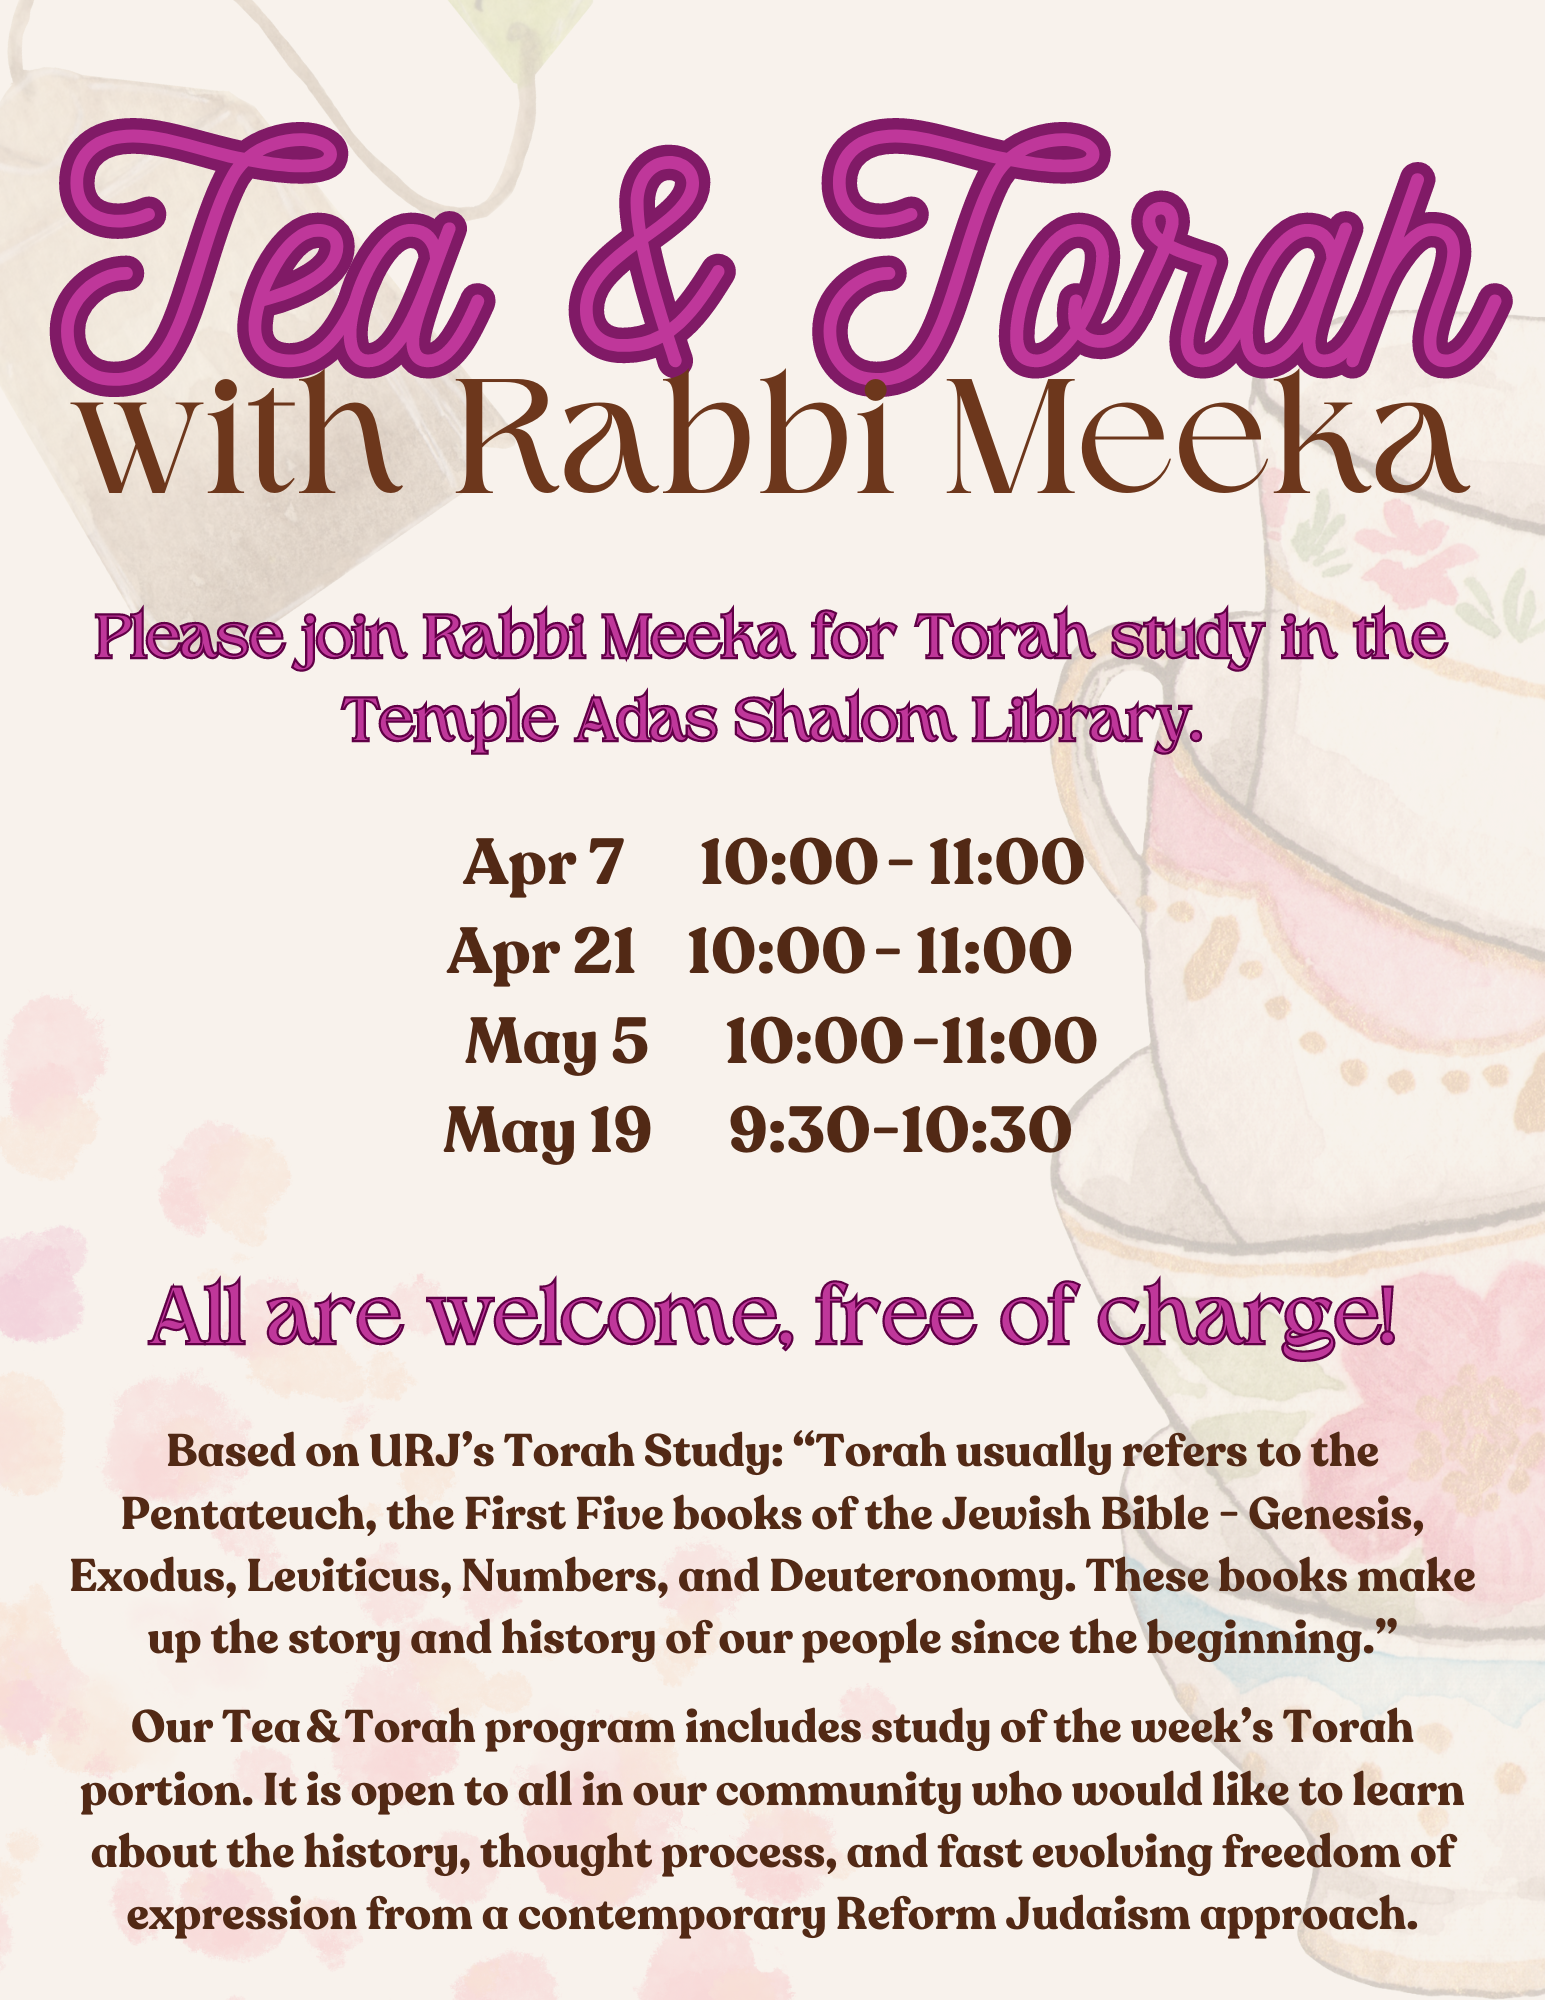 TEA & TORAH WITH RABBI MEEKA Based on URJ’s Torah Study “Torah usually refers to the Pentateuch, the First Five books of the Jewish Bible - Genesis, Exodus, Leviticus, Numbers, and Deuteronomy. Th (2)